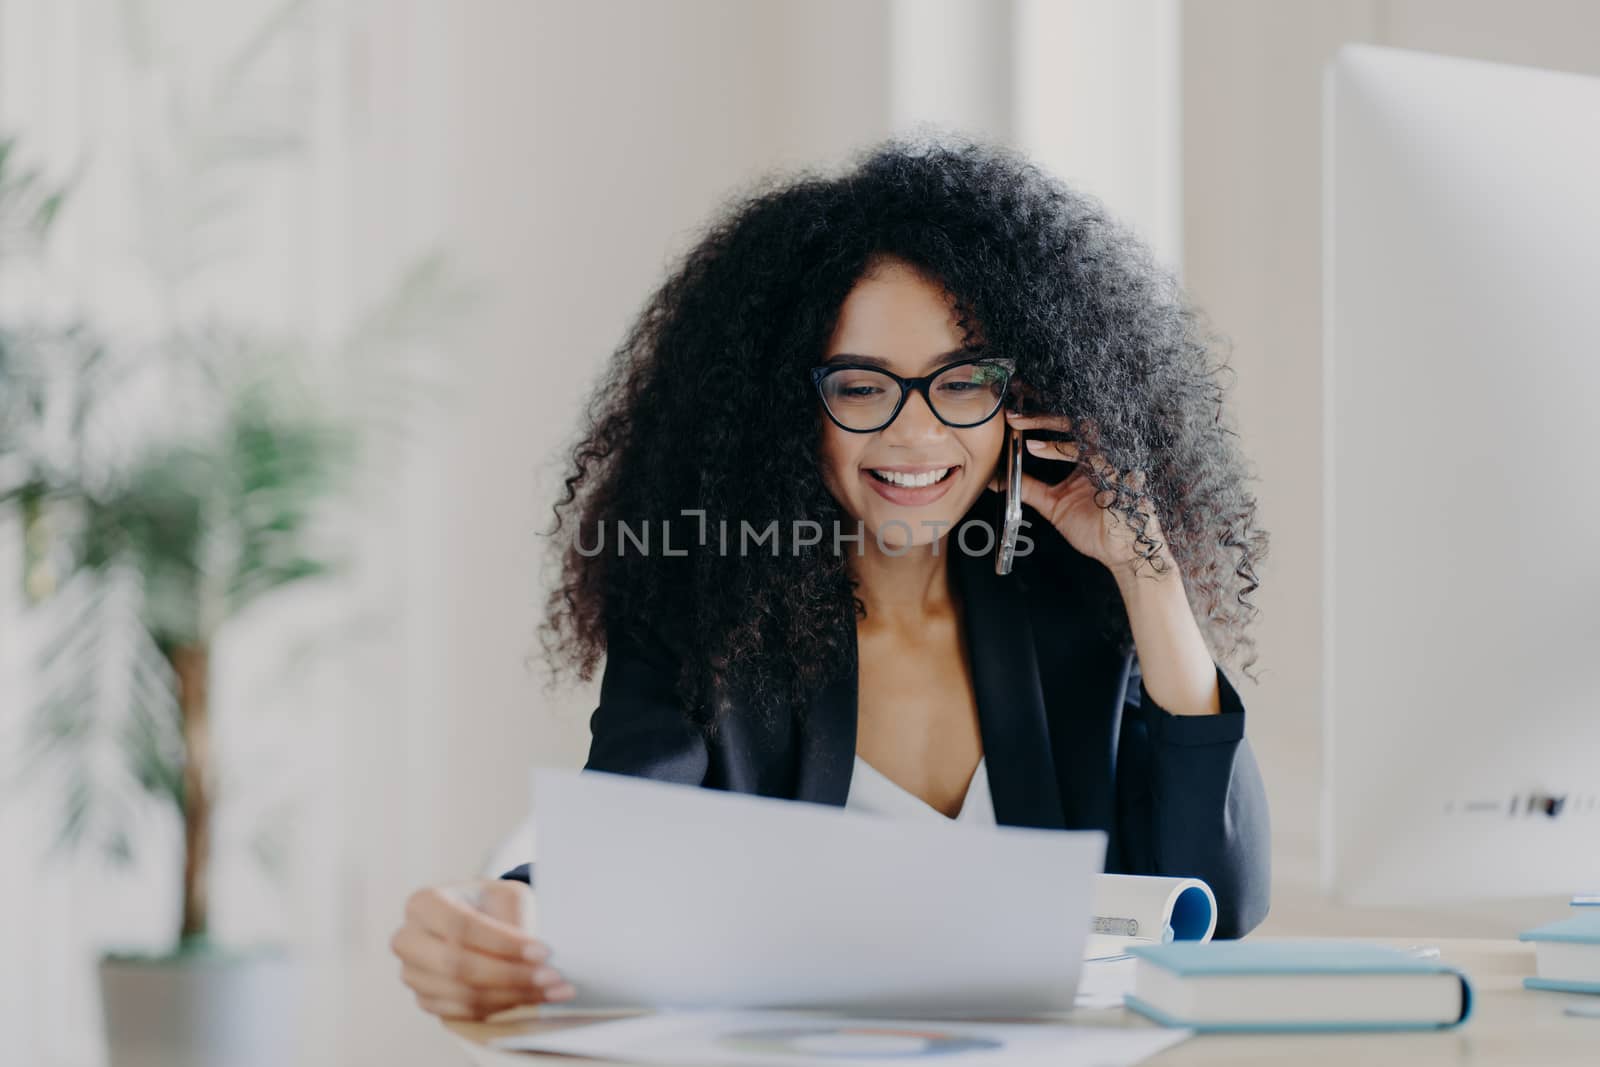 Experienced female CEO has telephone conversation, solves problem, focused in documents, wears spectacles and formal wear, poses at work place, has cheerful expression. Administrative manager by vkstock